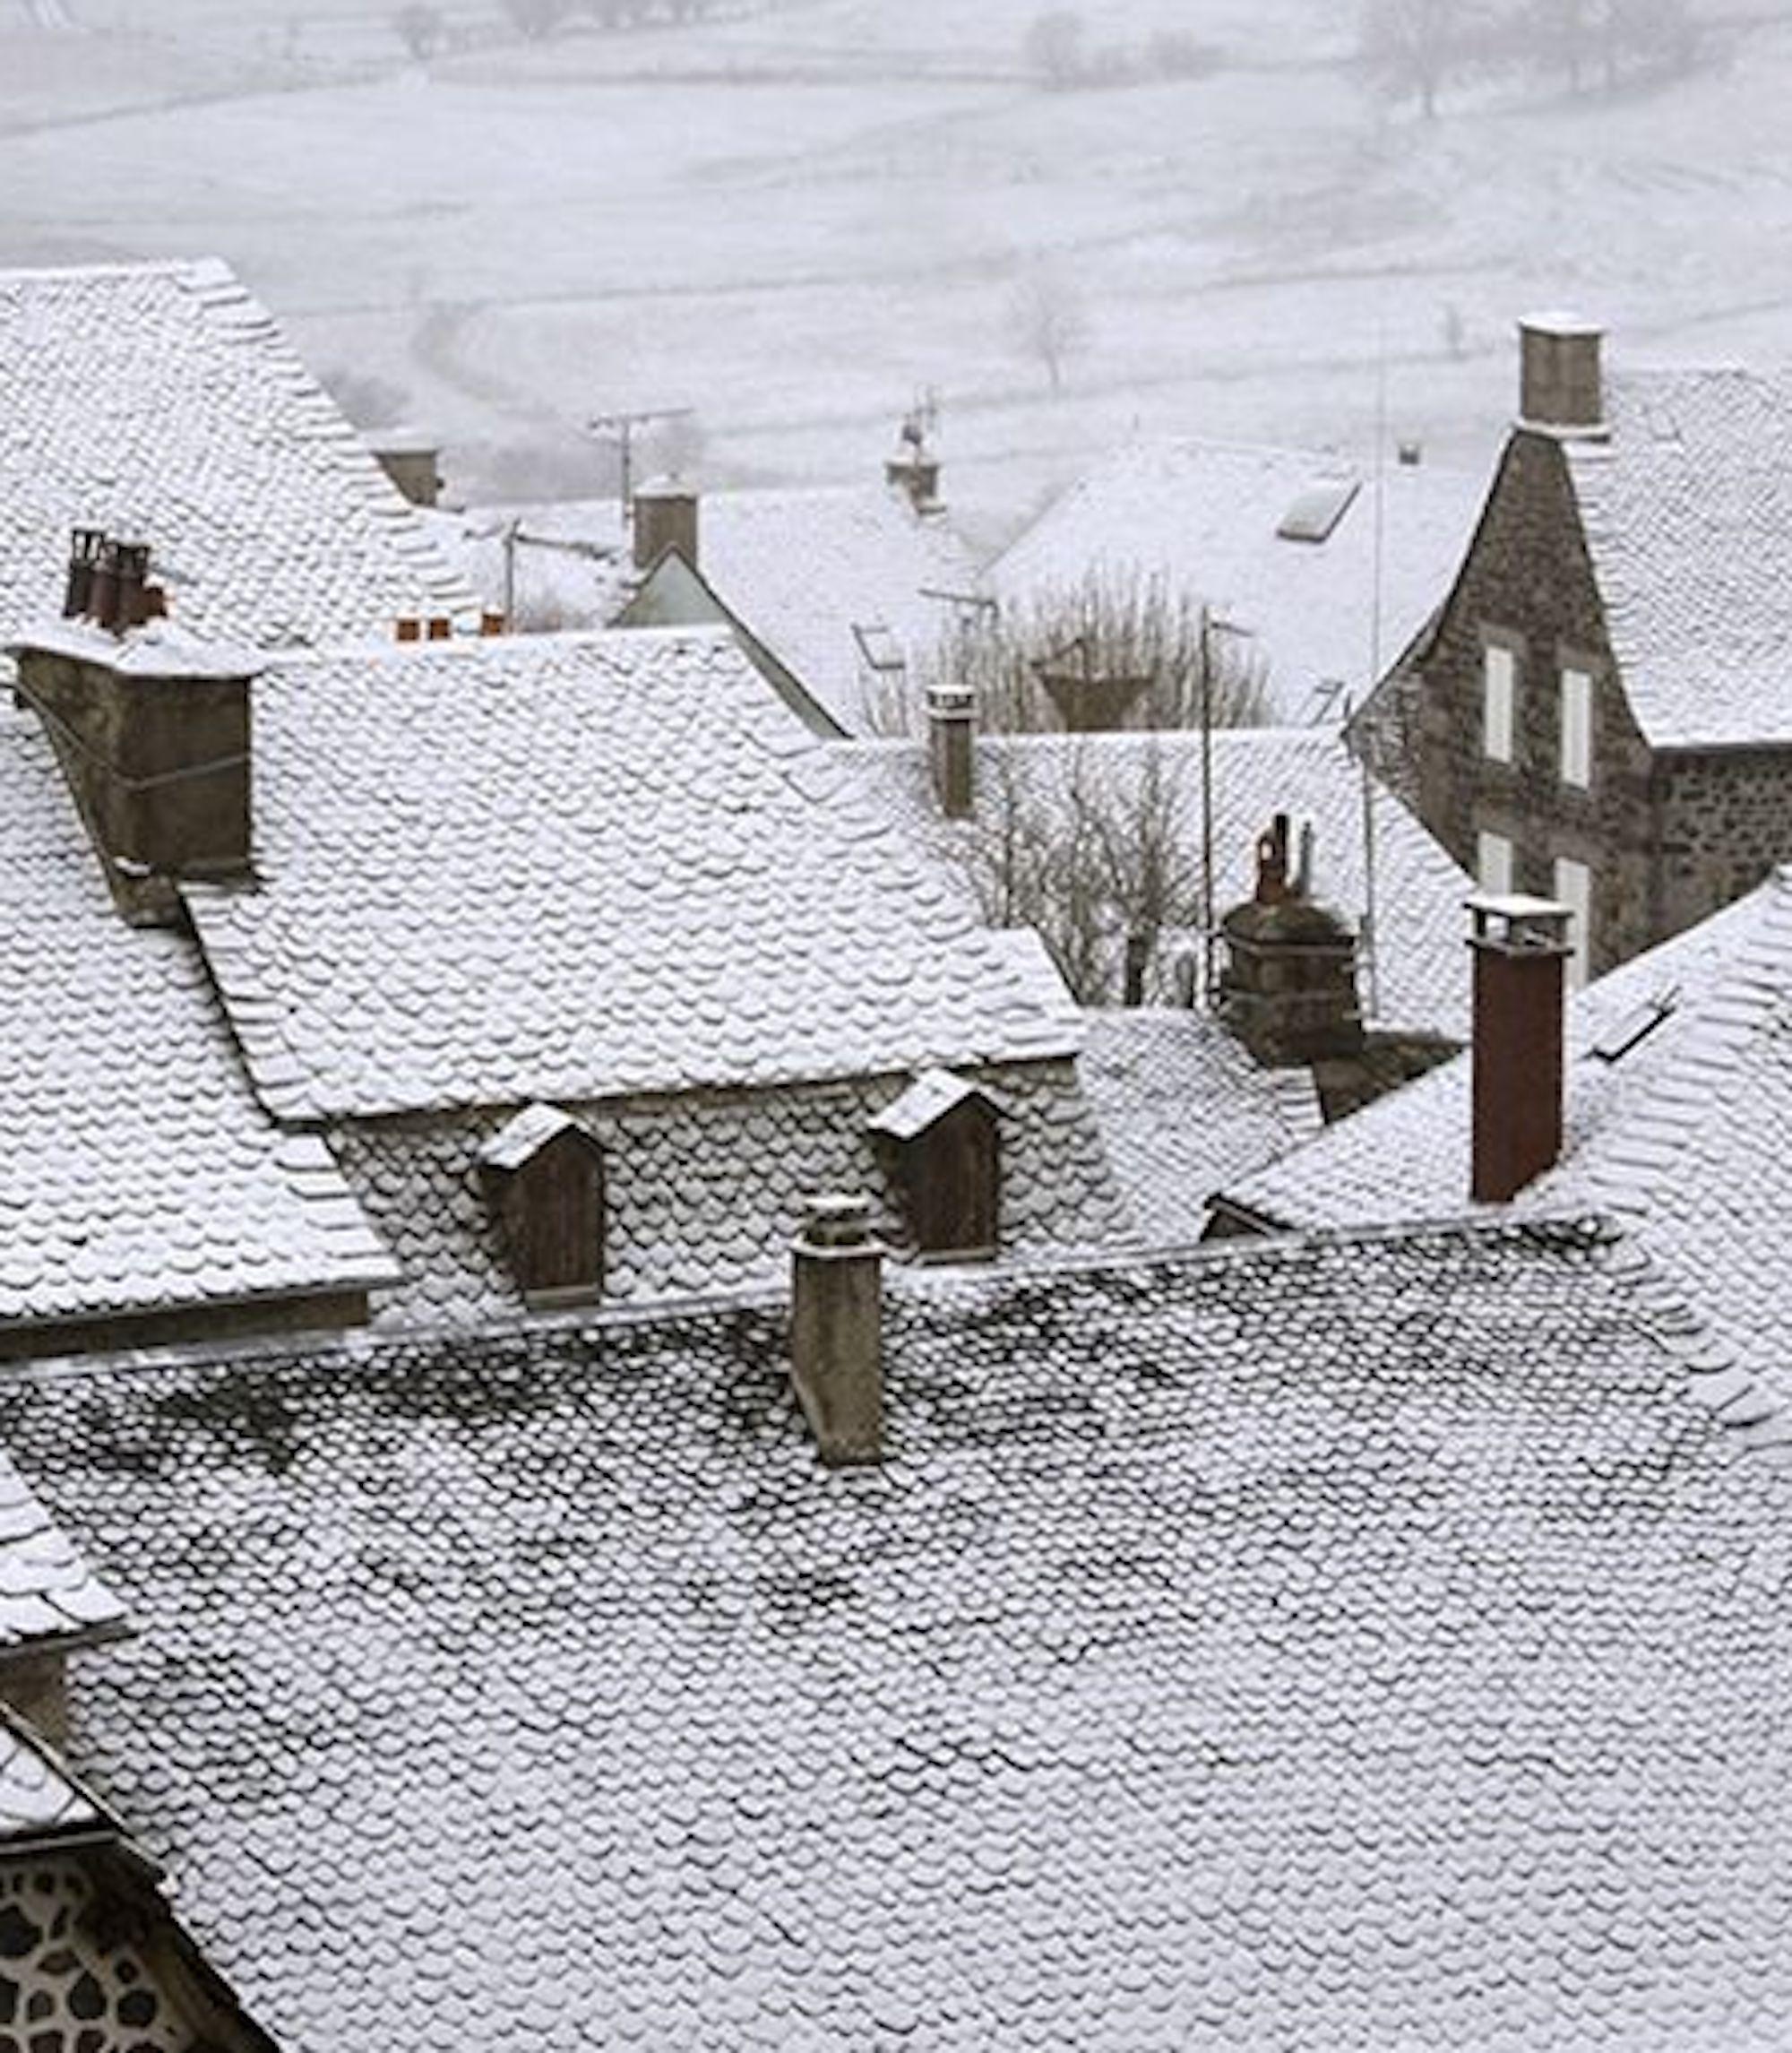 Tiled roof by Christophe Jacrot - Winter landscape photography, buildings, snowy For Sale 3